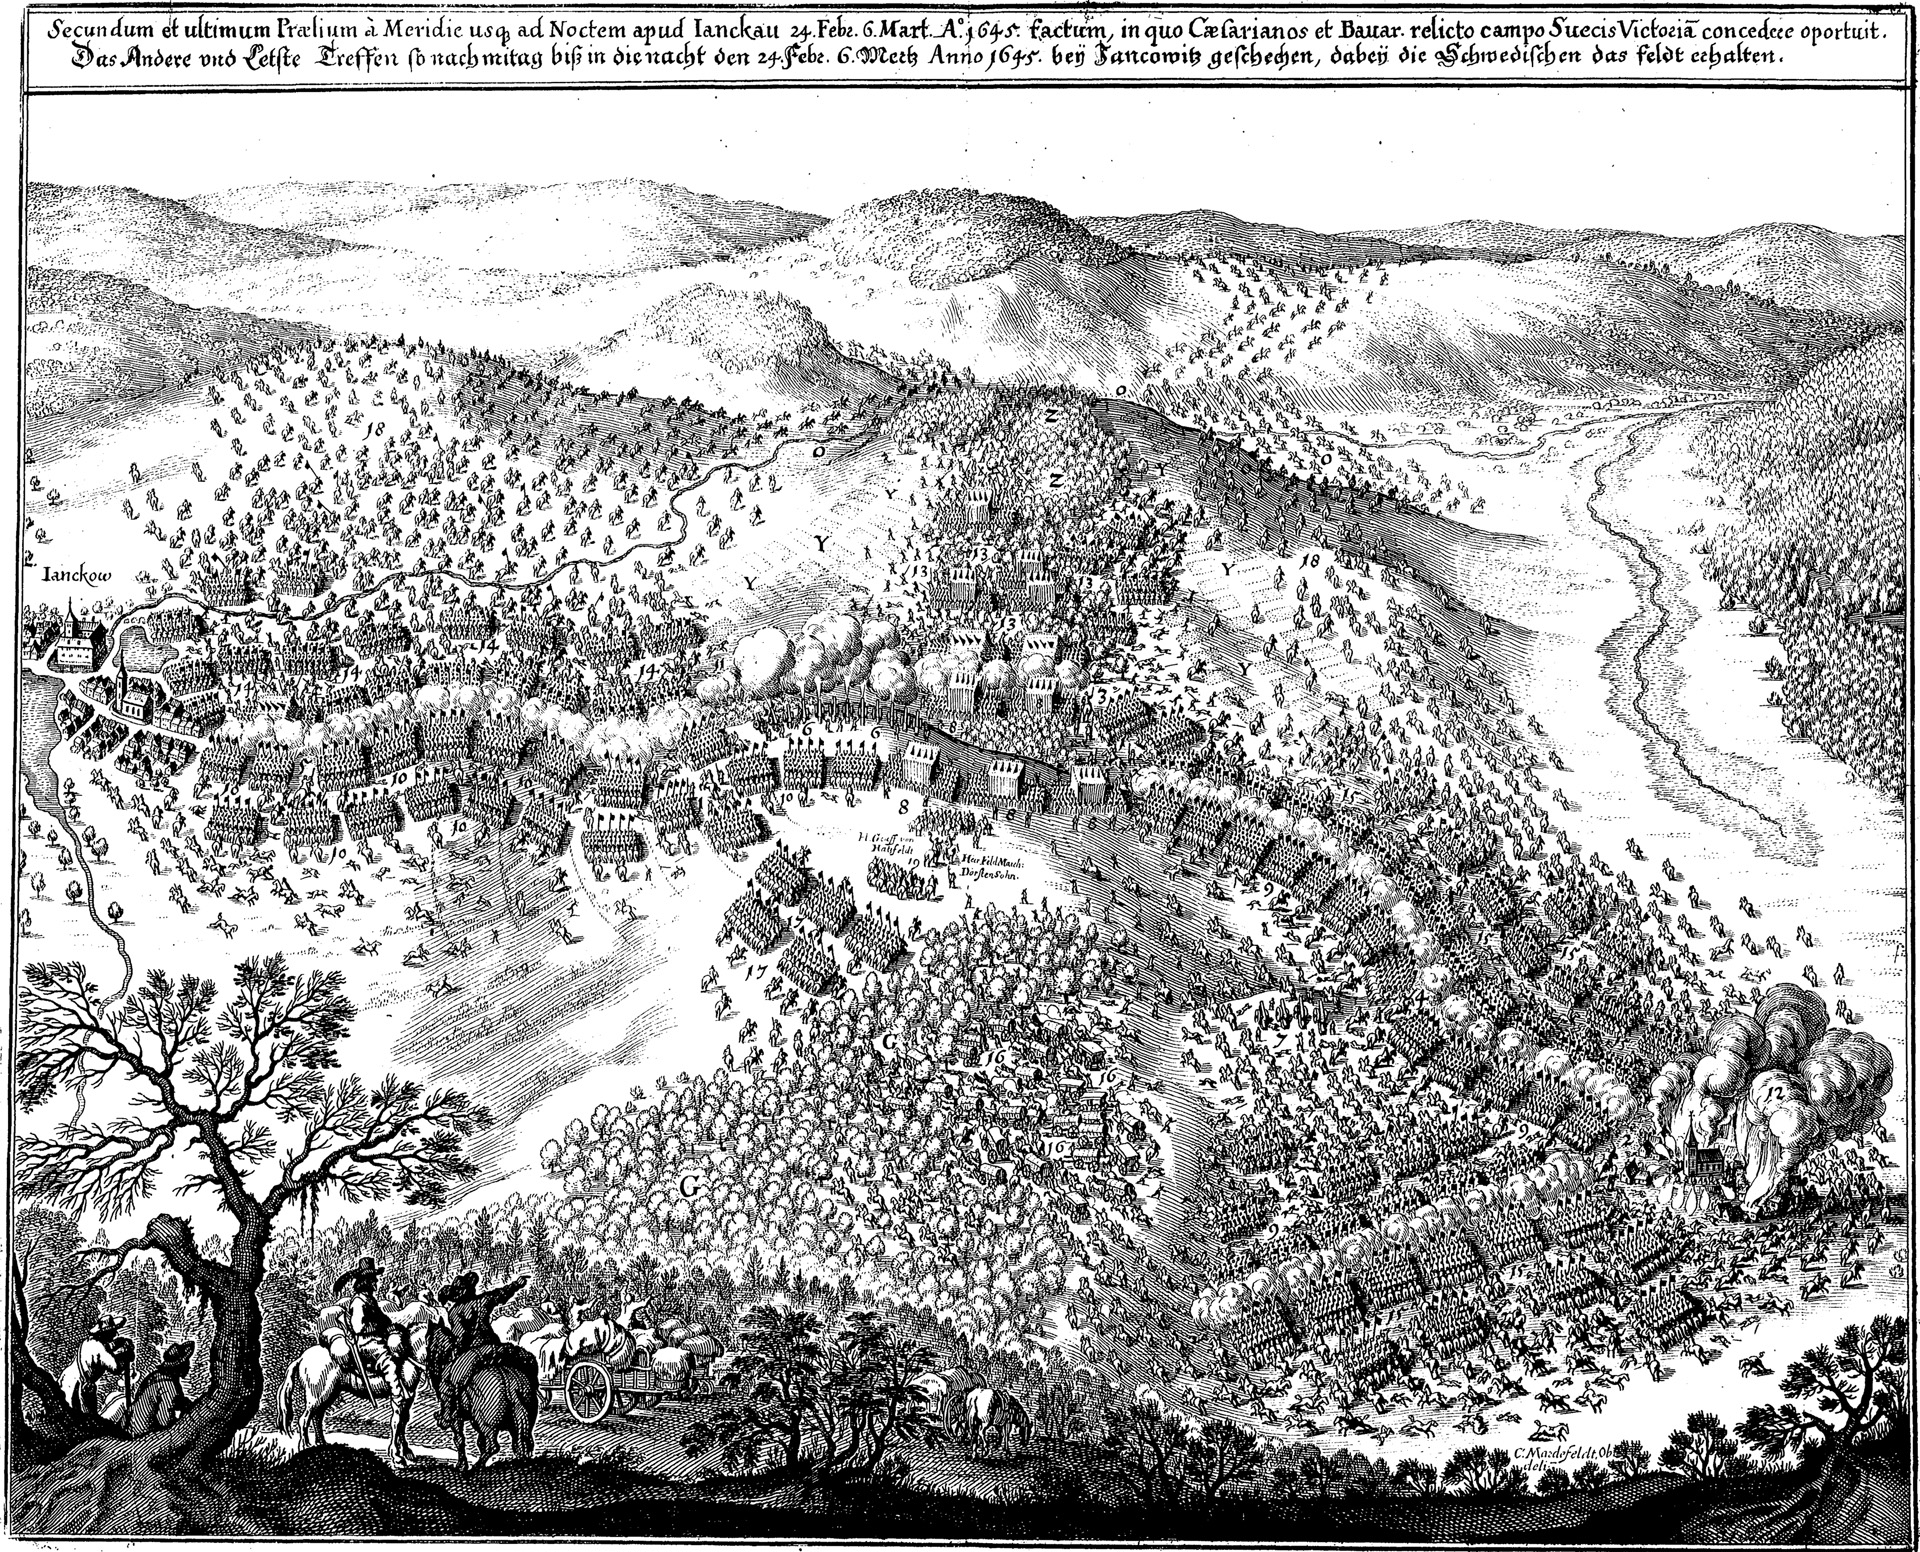 Torstensson defeated the Hapsburg Catholics at Jankau in Bohemia in 1645 by advancing his field artillery against the enemy as it fell back in the face of a powerful Swedish attack.